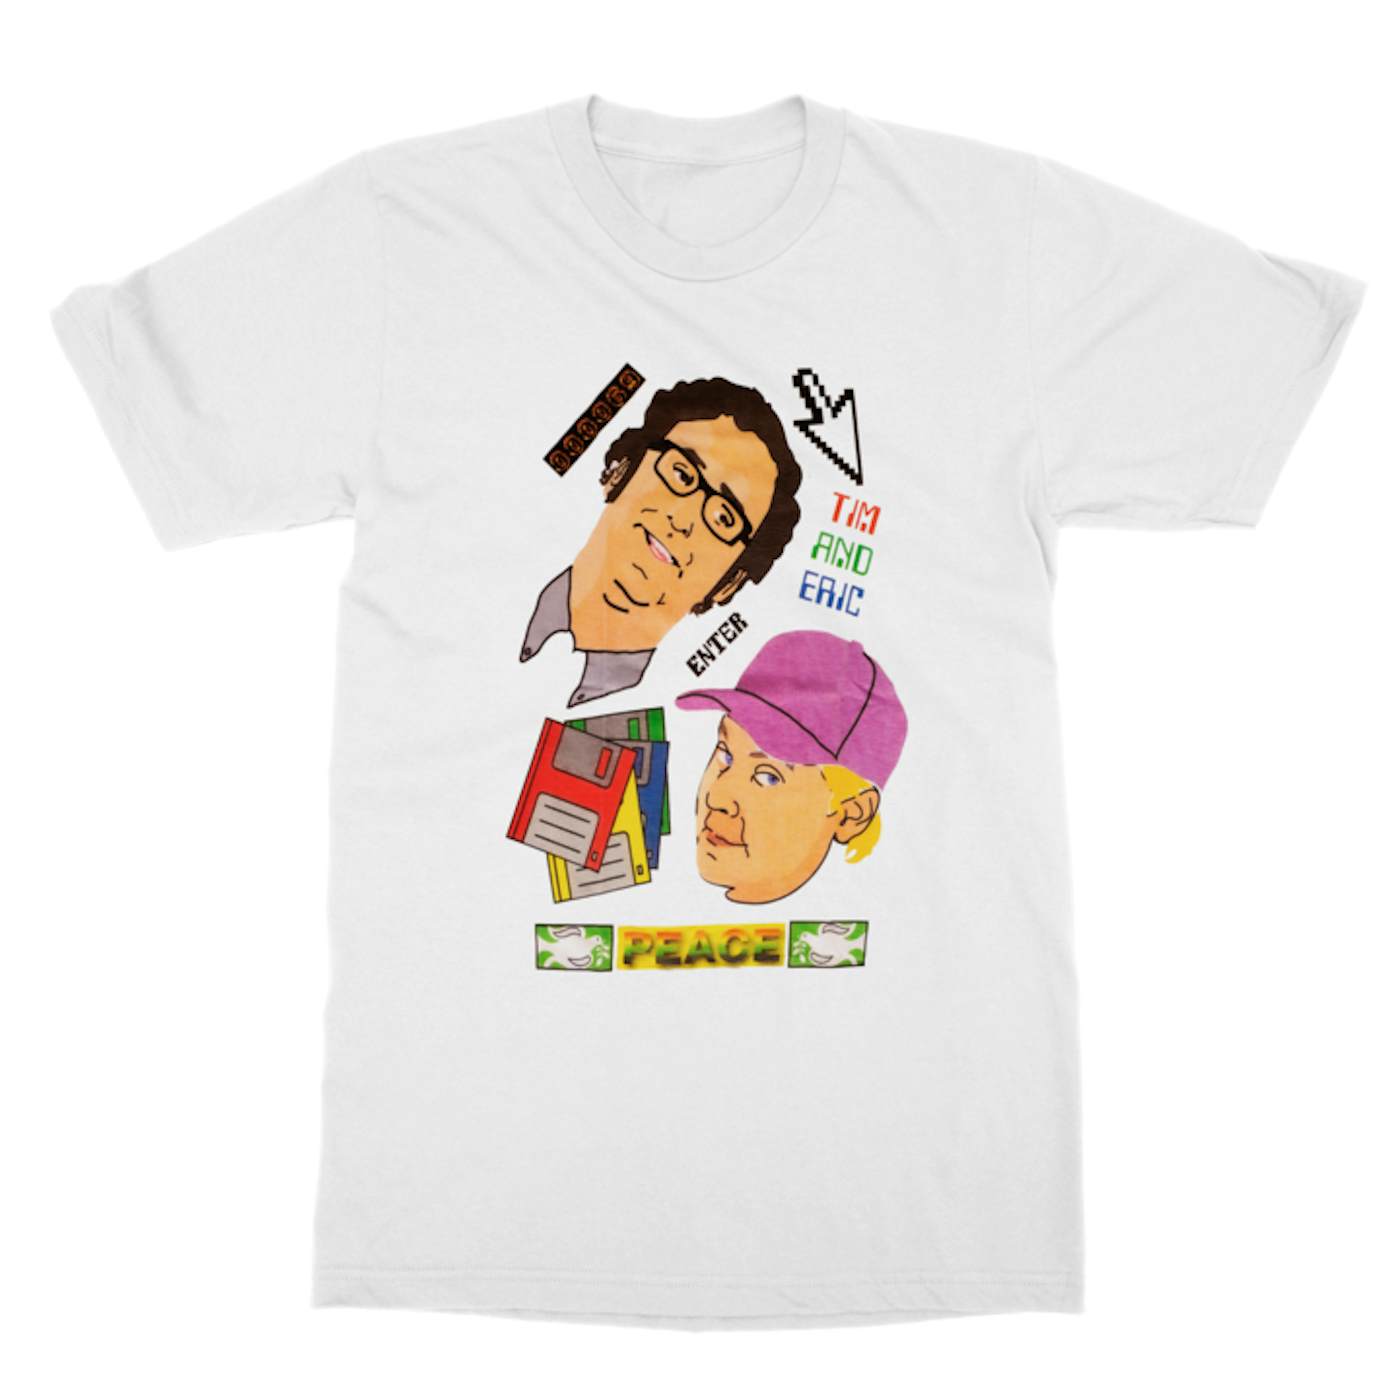 Tim and Eric Peace Heads T-Shirt $20.00